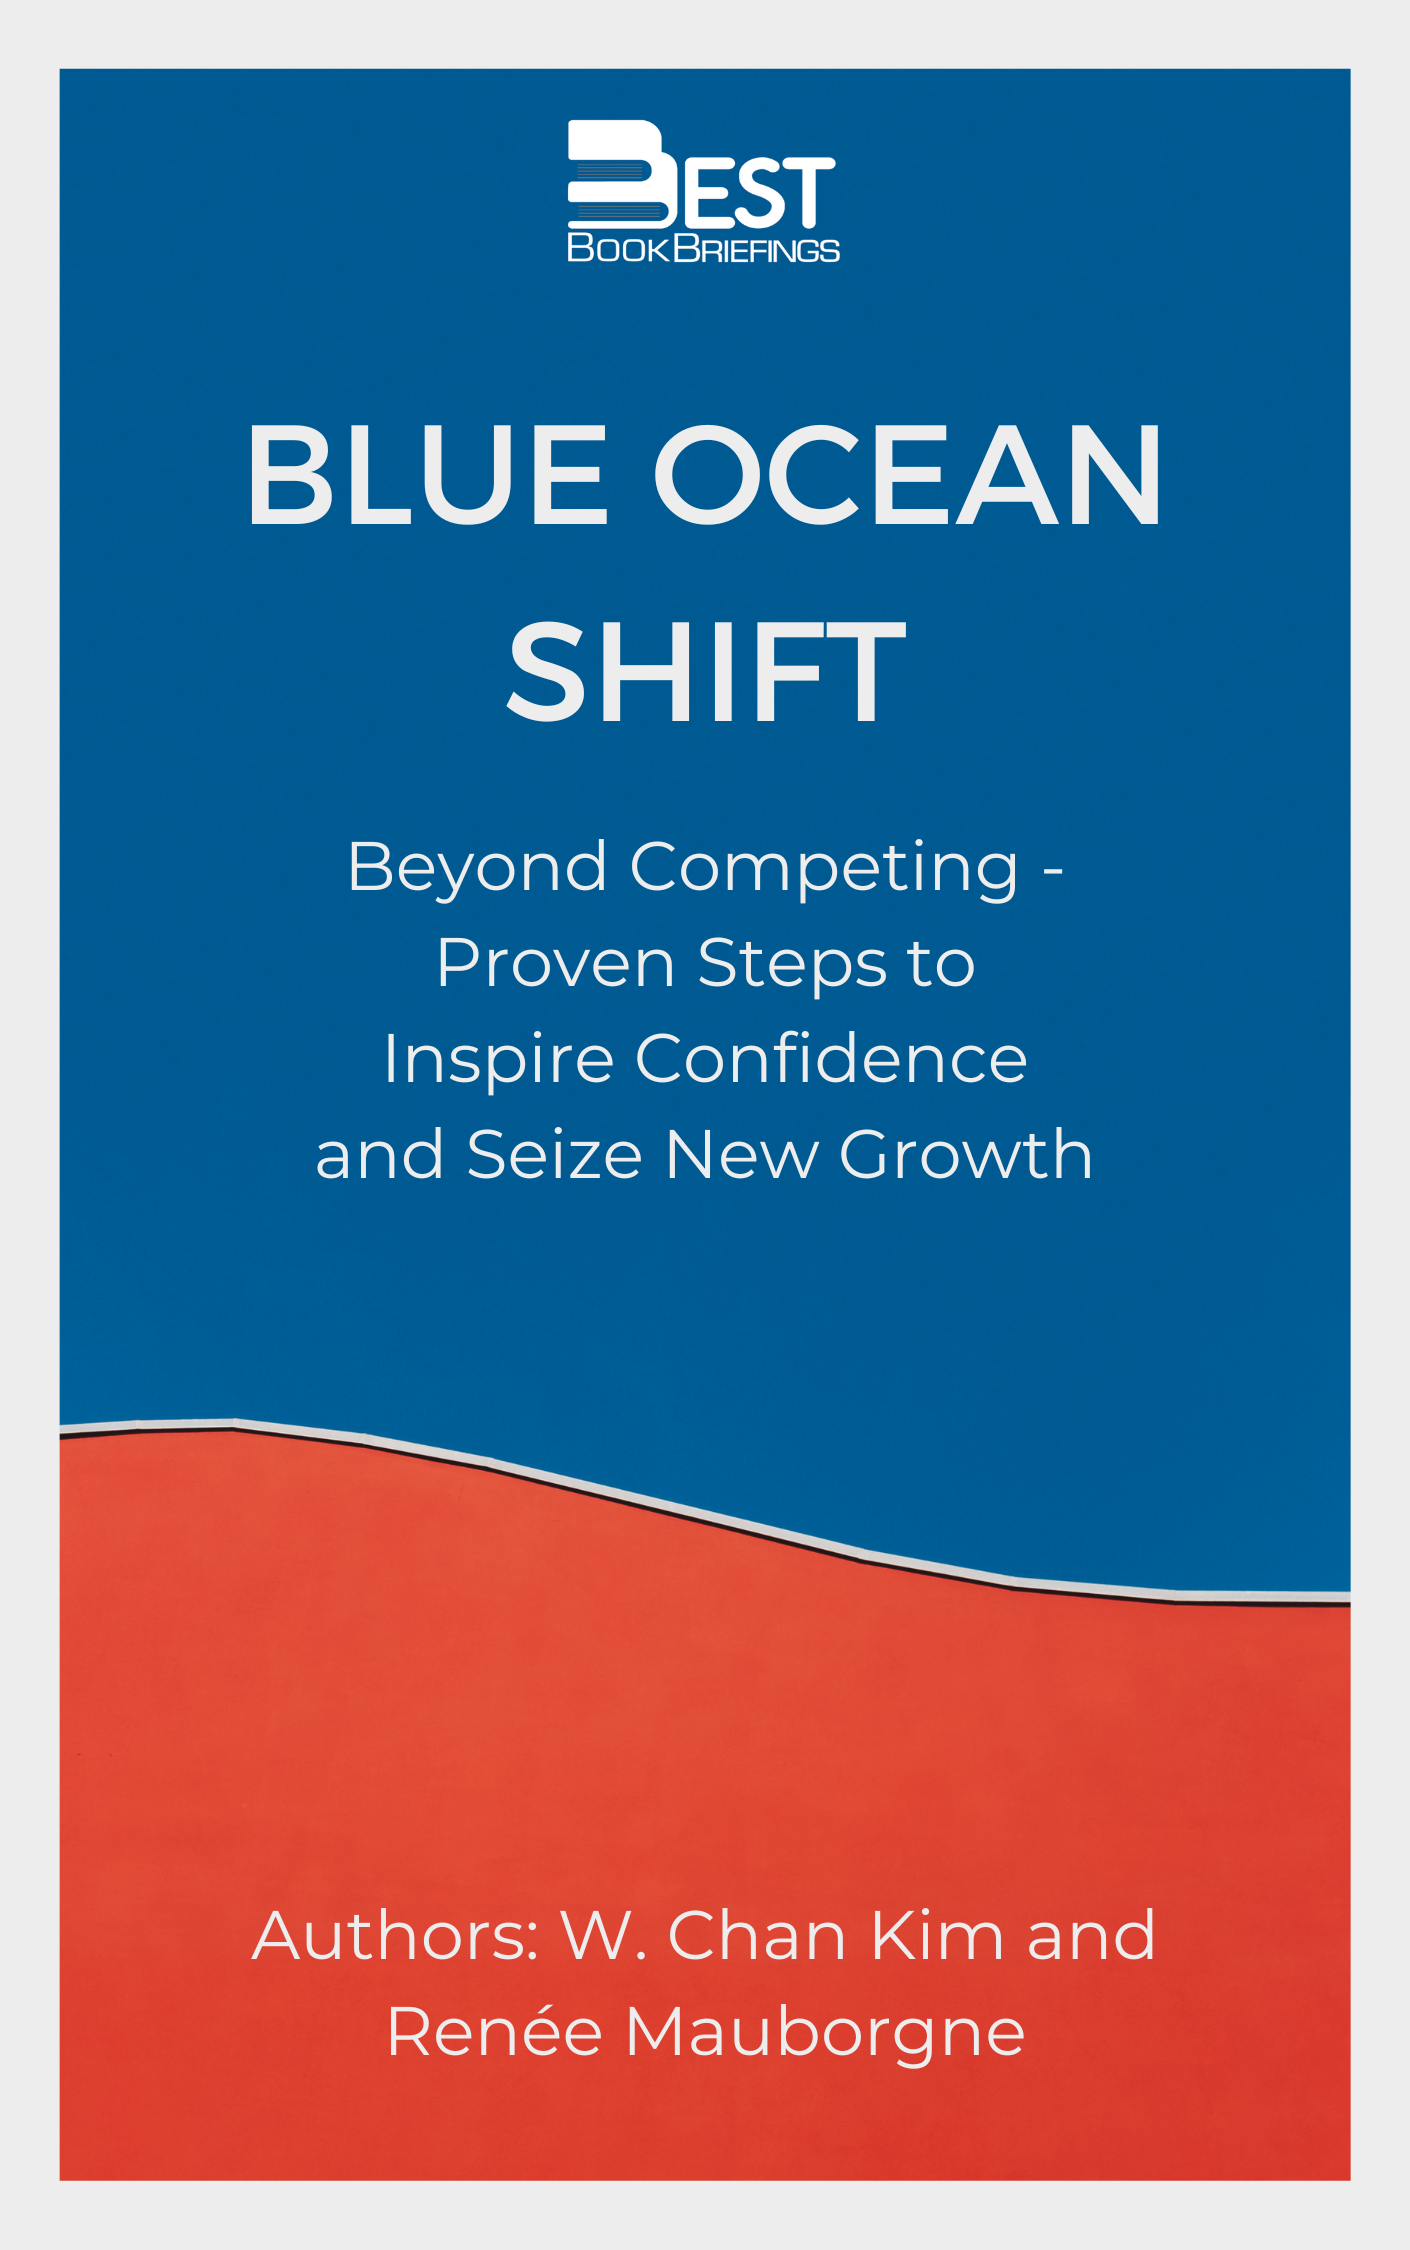 BLUE OCEAN SHIFT is the essential follow-up to Blue Ocean Strategy, the classic and 3.6 million copy global bestseller by world-renowned professors W. Chan Kim and Renee Mauborgne. Drawing on more than a decade of new work, Kim and Mauborgne show you how to move beyond competing, inspire your people's confidence, 